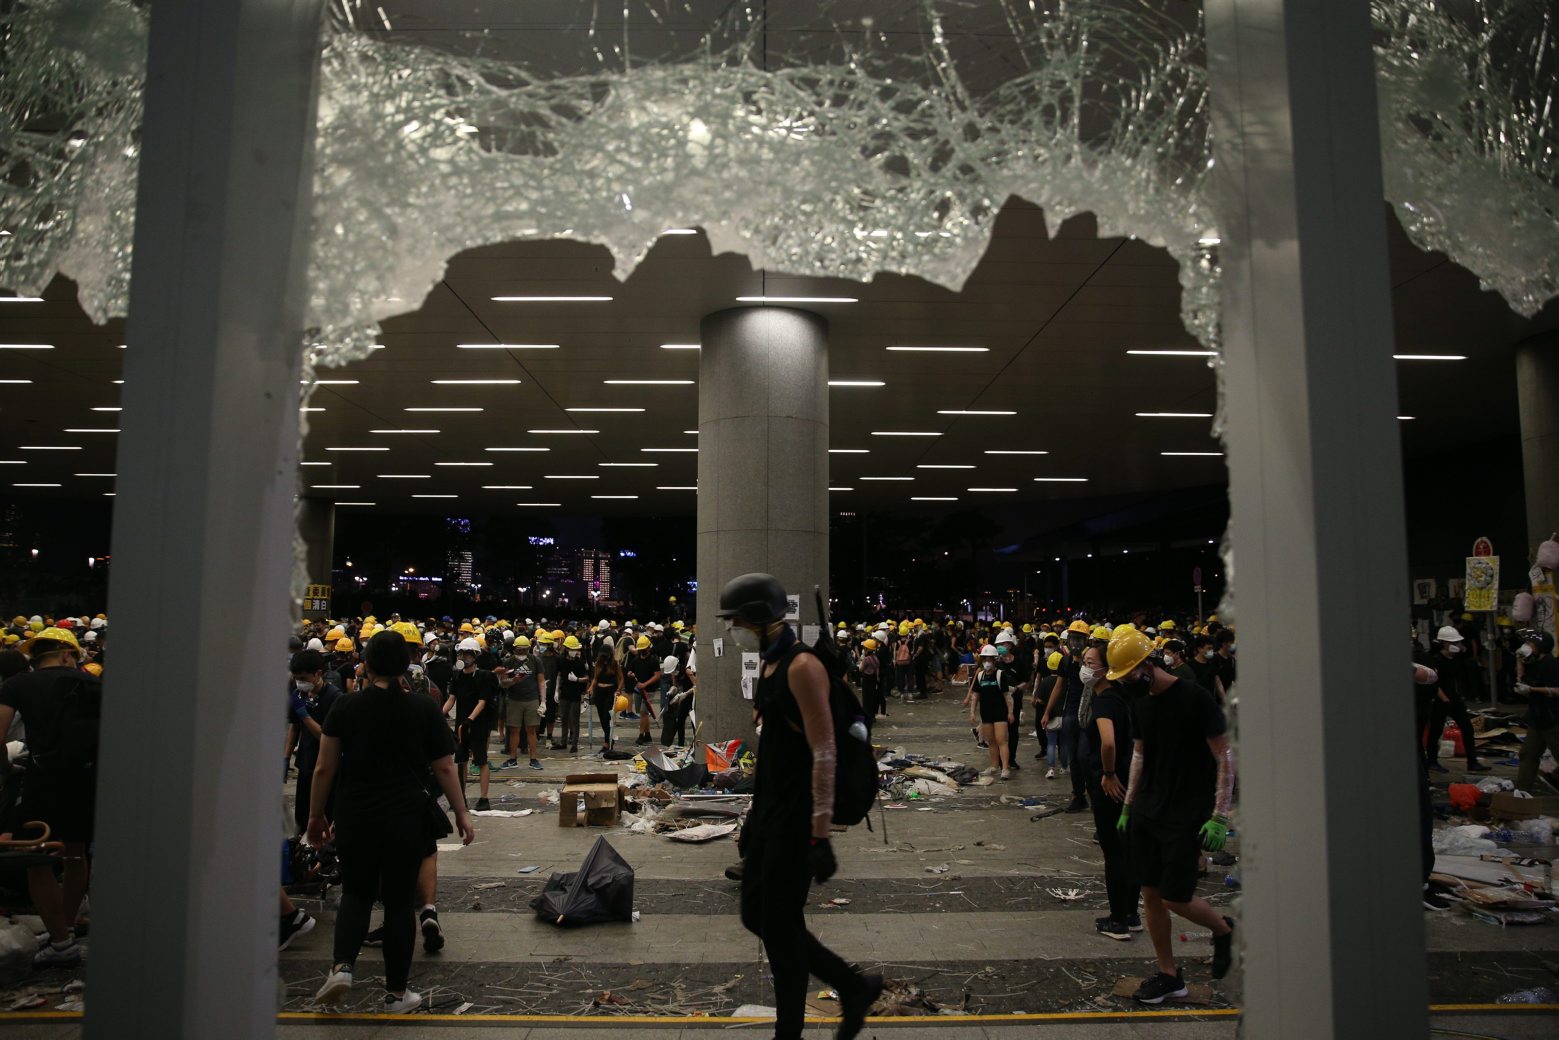 epa07687529 Protesters are seen through broken glass panels after they break into the Legislative Council building during the annual 01 July pro-democracy march in Hong Kong, China, 01 July 2019. Protesters are demanding the resignation of Hong Kong Chief Executive Carrie Lam and the full withdrawal of a suspended extradition bill. On 01 July, Hong Kong marks the 1997 transfer of sovereignty of Hong Kong from Britain to China.  EPA/JEROME FAVRE CHINA HONG KONG EXTRADIITON BILL